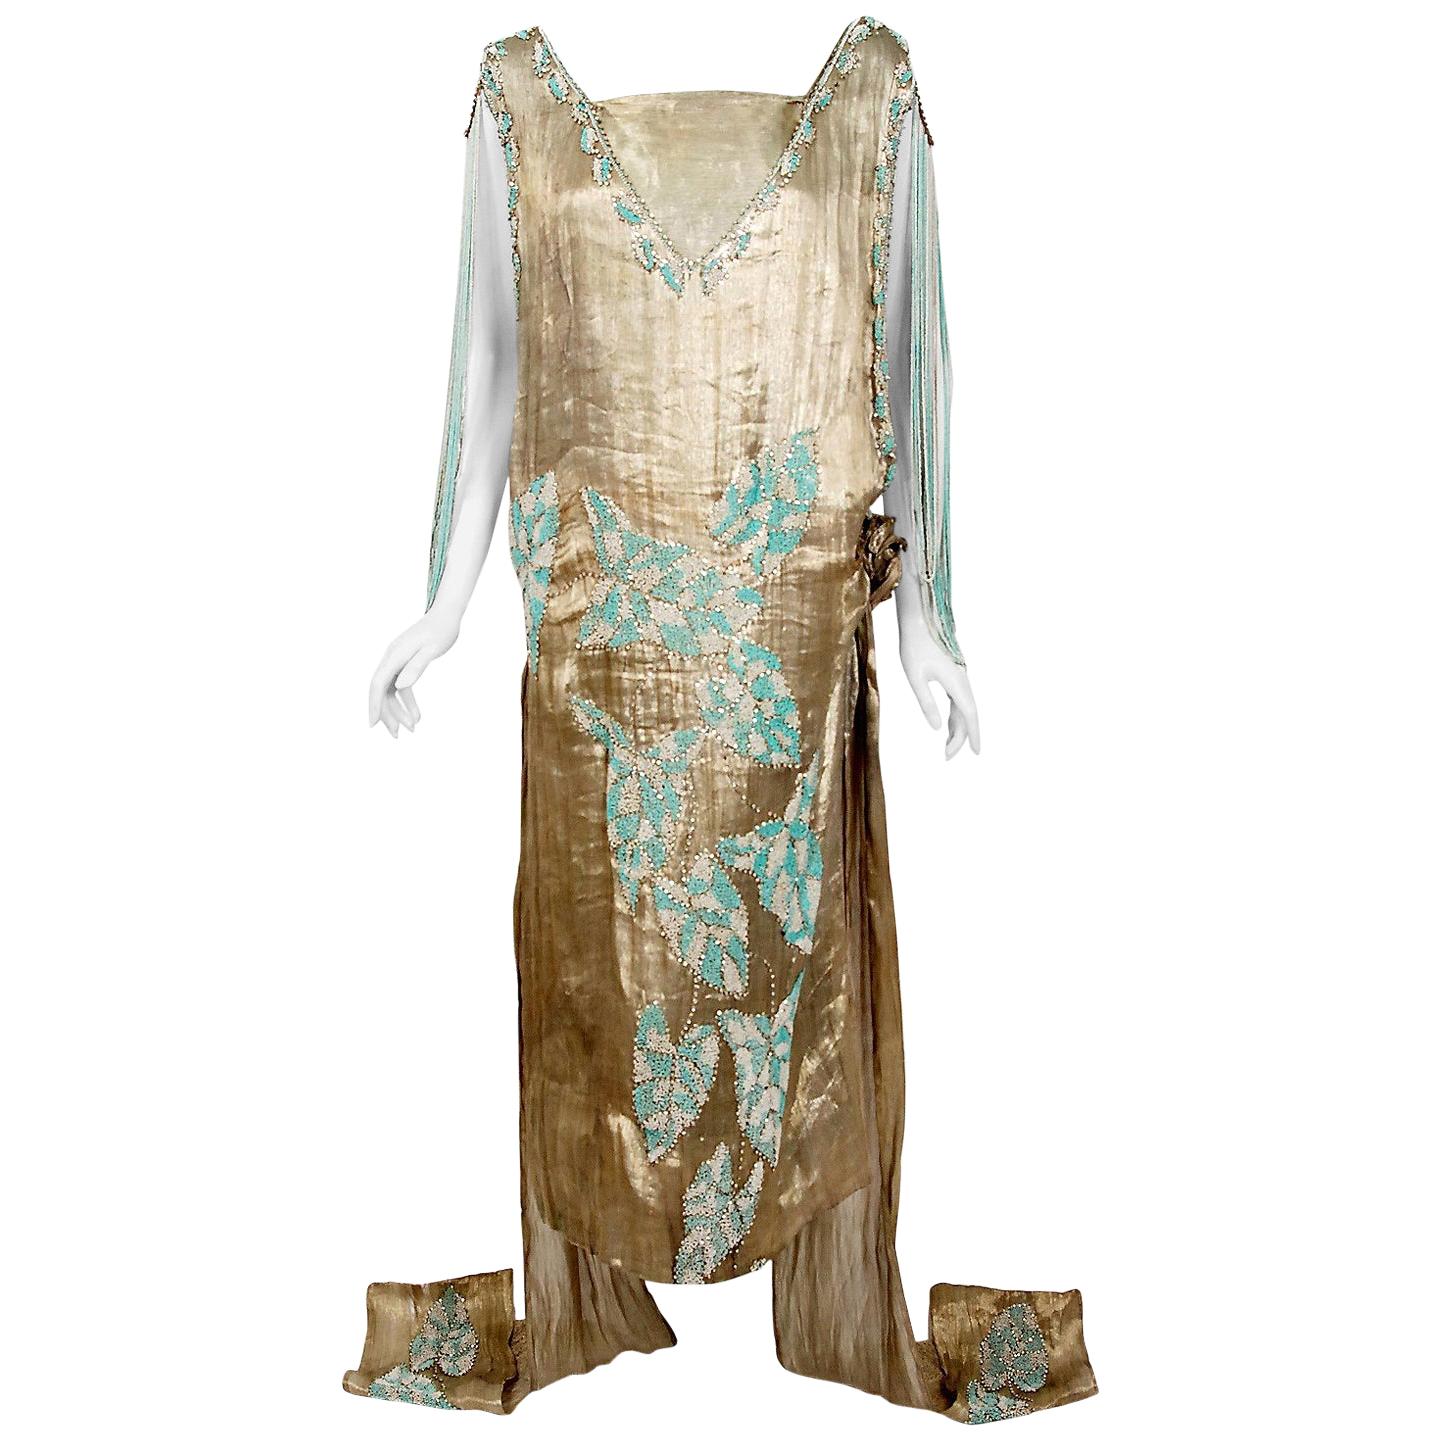 Vintage 1920's French Couture Metallic Gold Lamé Beaded Leaf-Motif Trained Gown